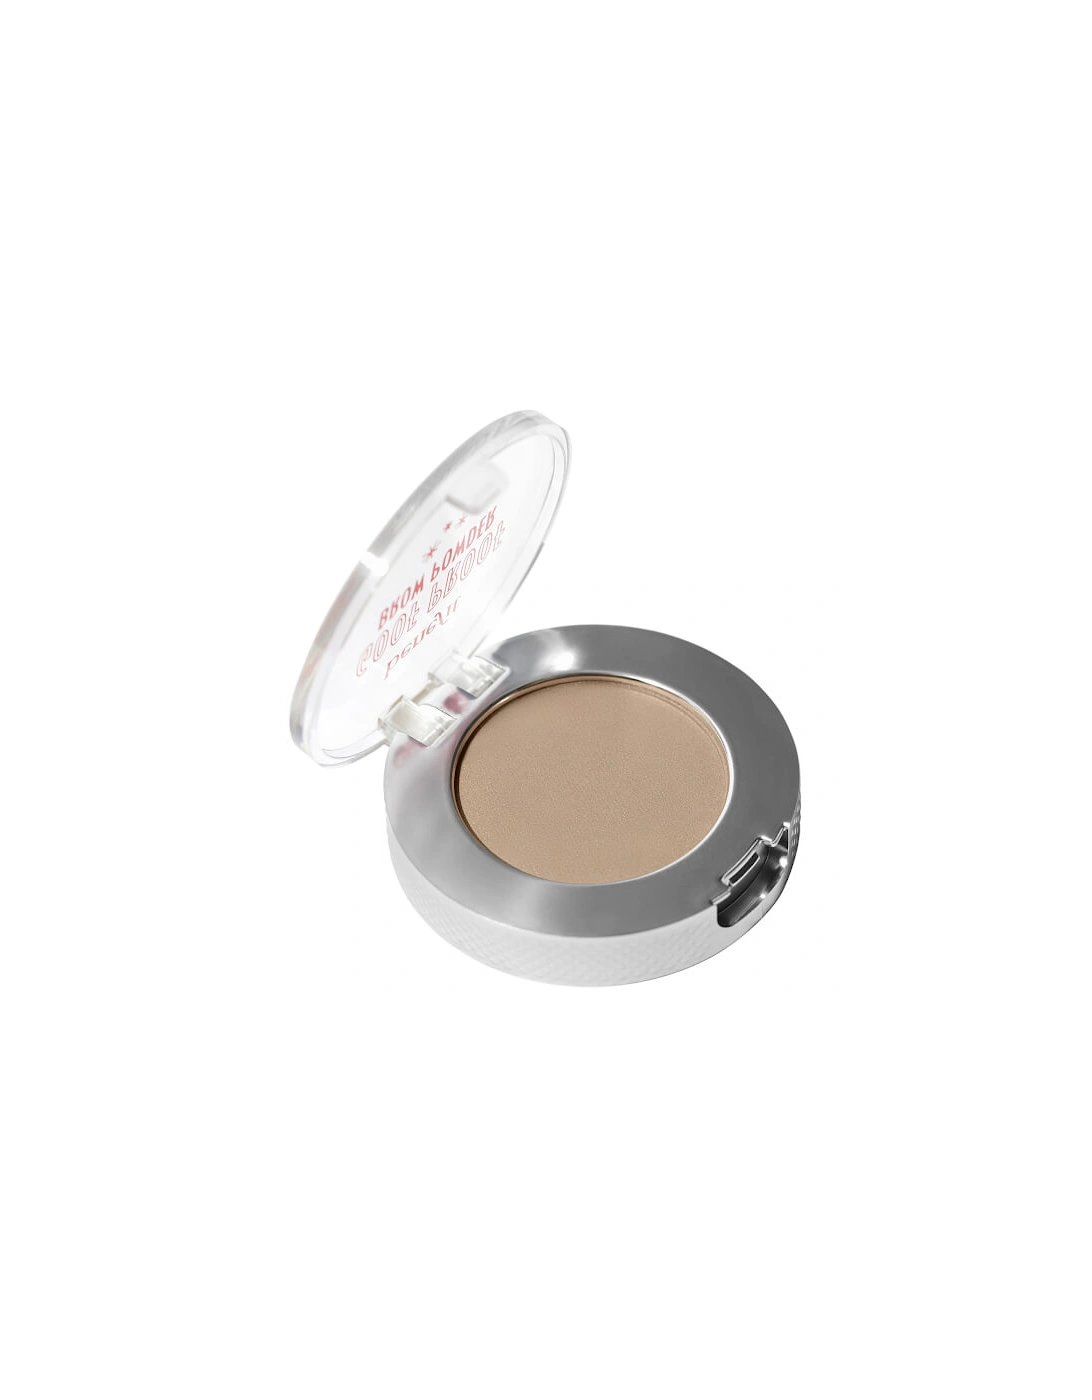 Goof Proof Easy Brow Filling Powder - 01 Cool Light Blonde, 11 of 10